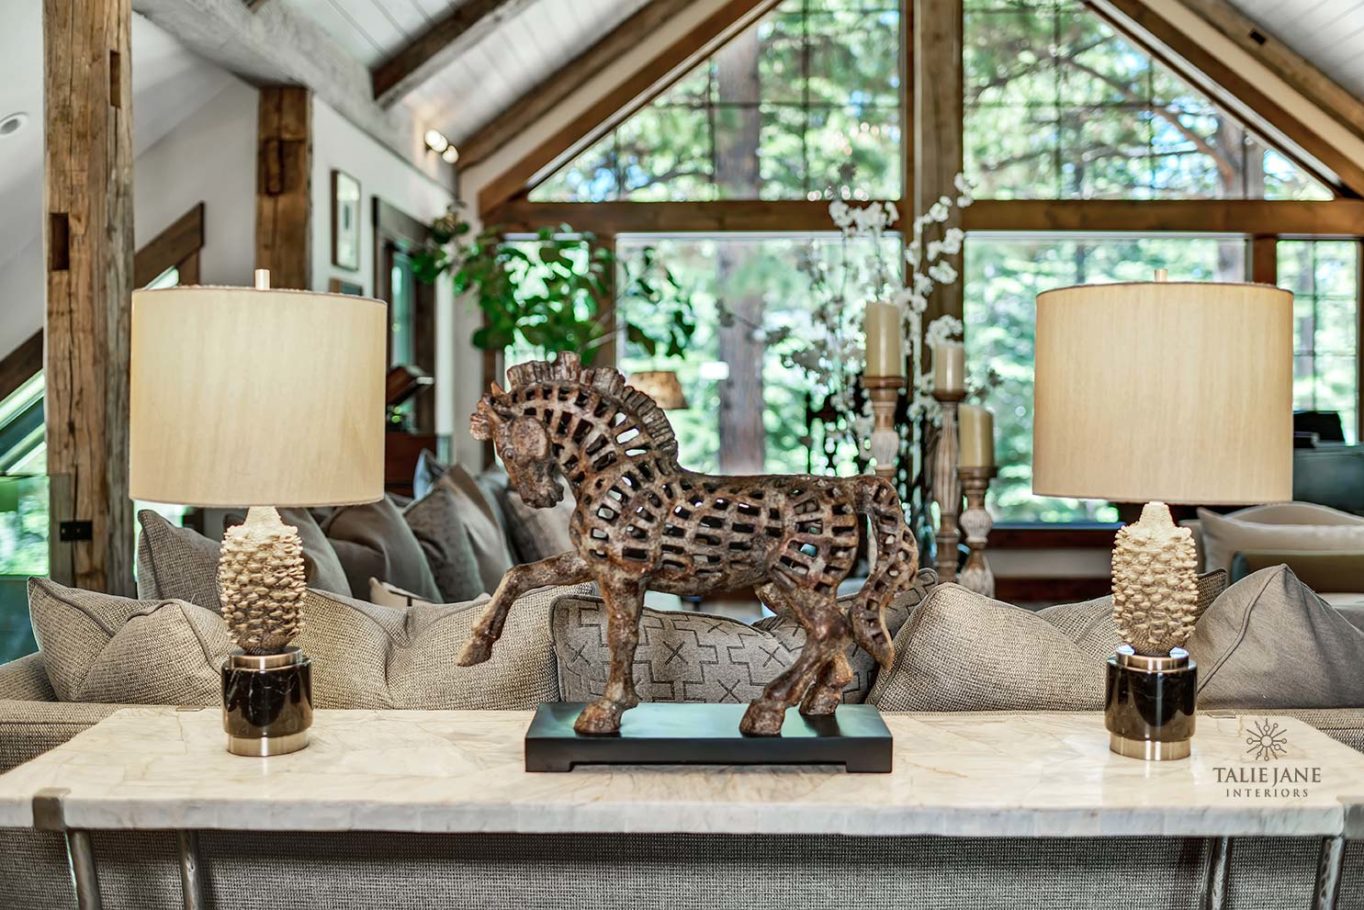 A Farmhouse-style living area with bronze horse statue and lights